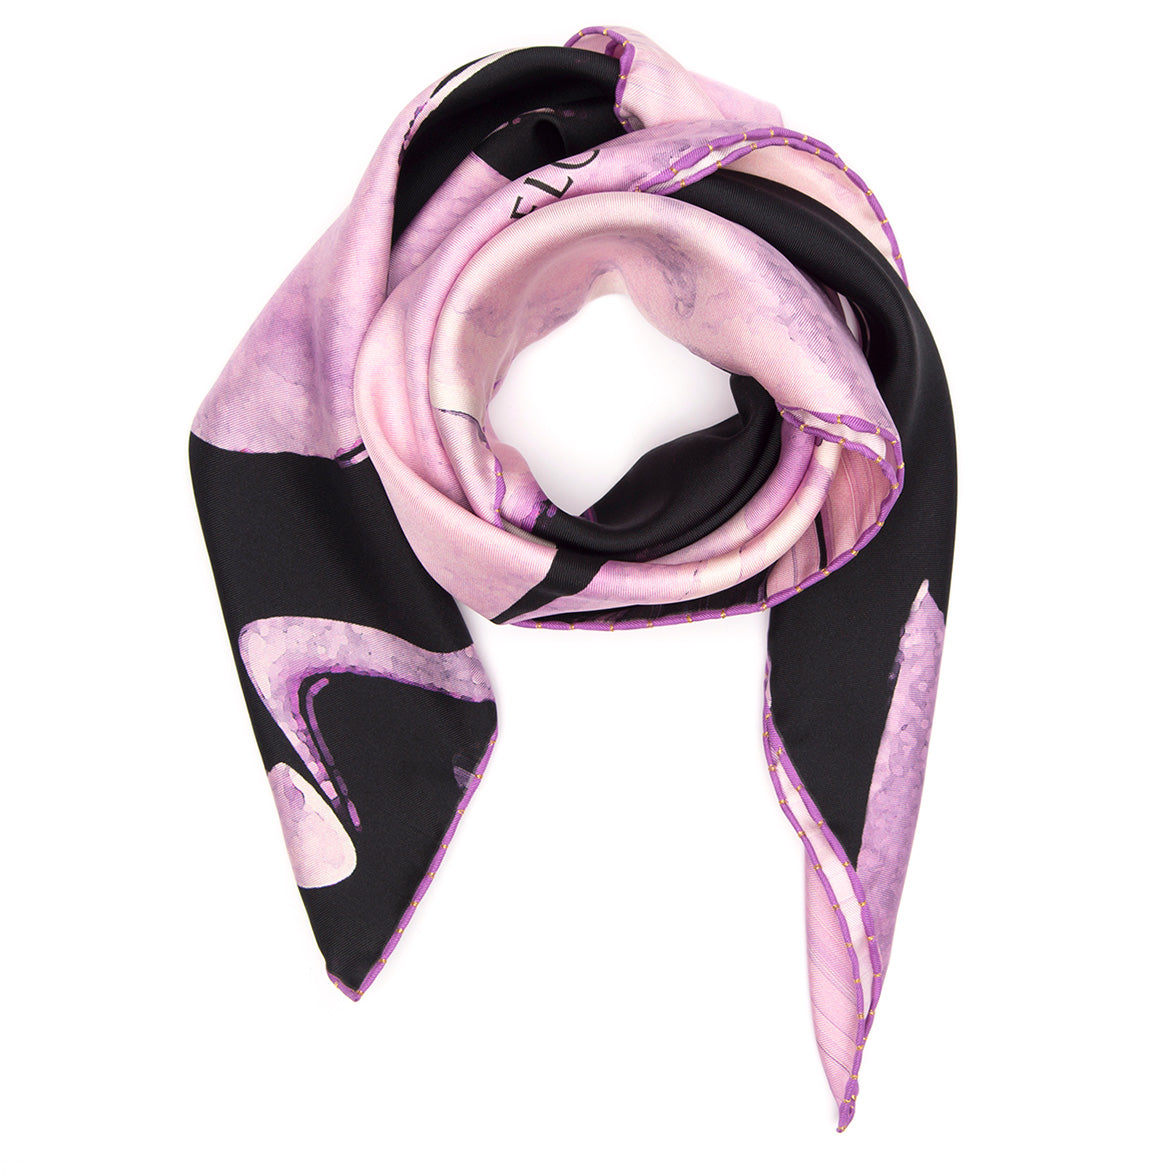 "Broken flowers" 100% Silk Scarf, limited edition, made in Italy